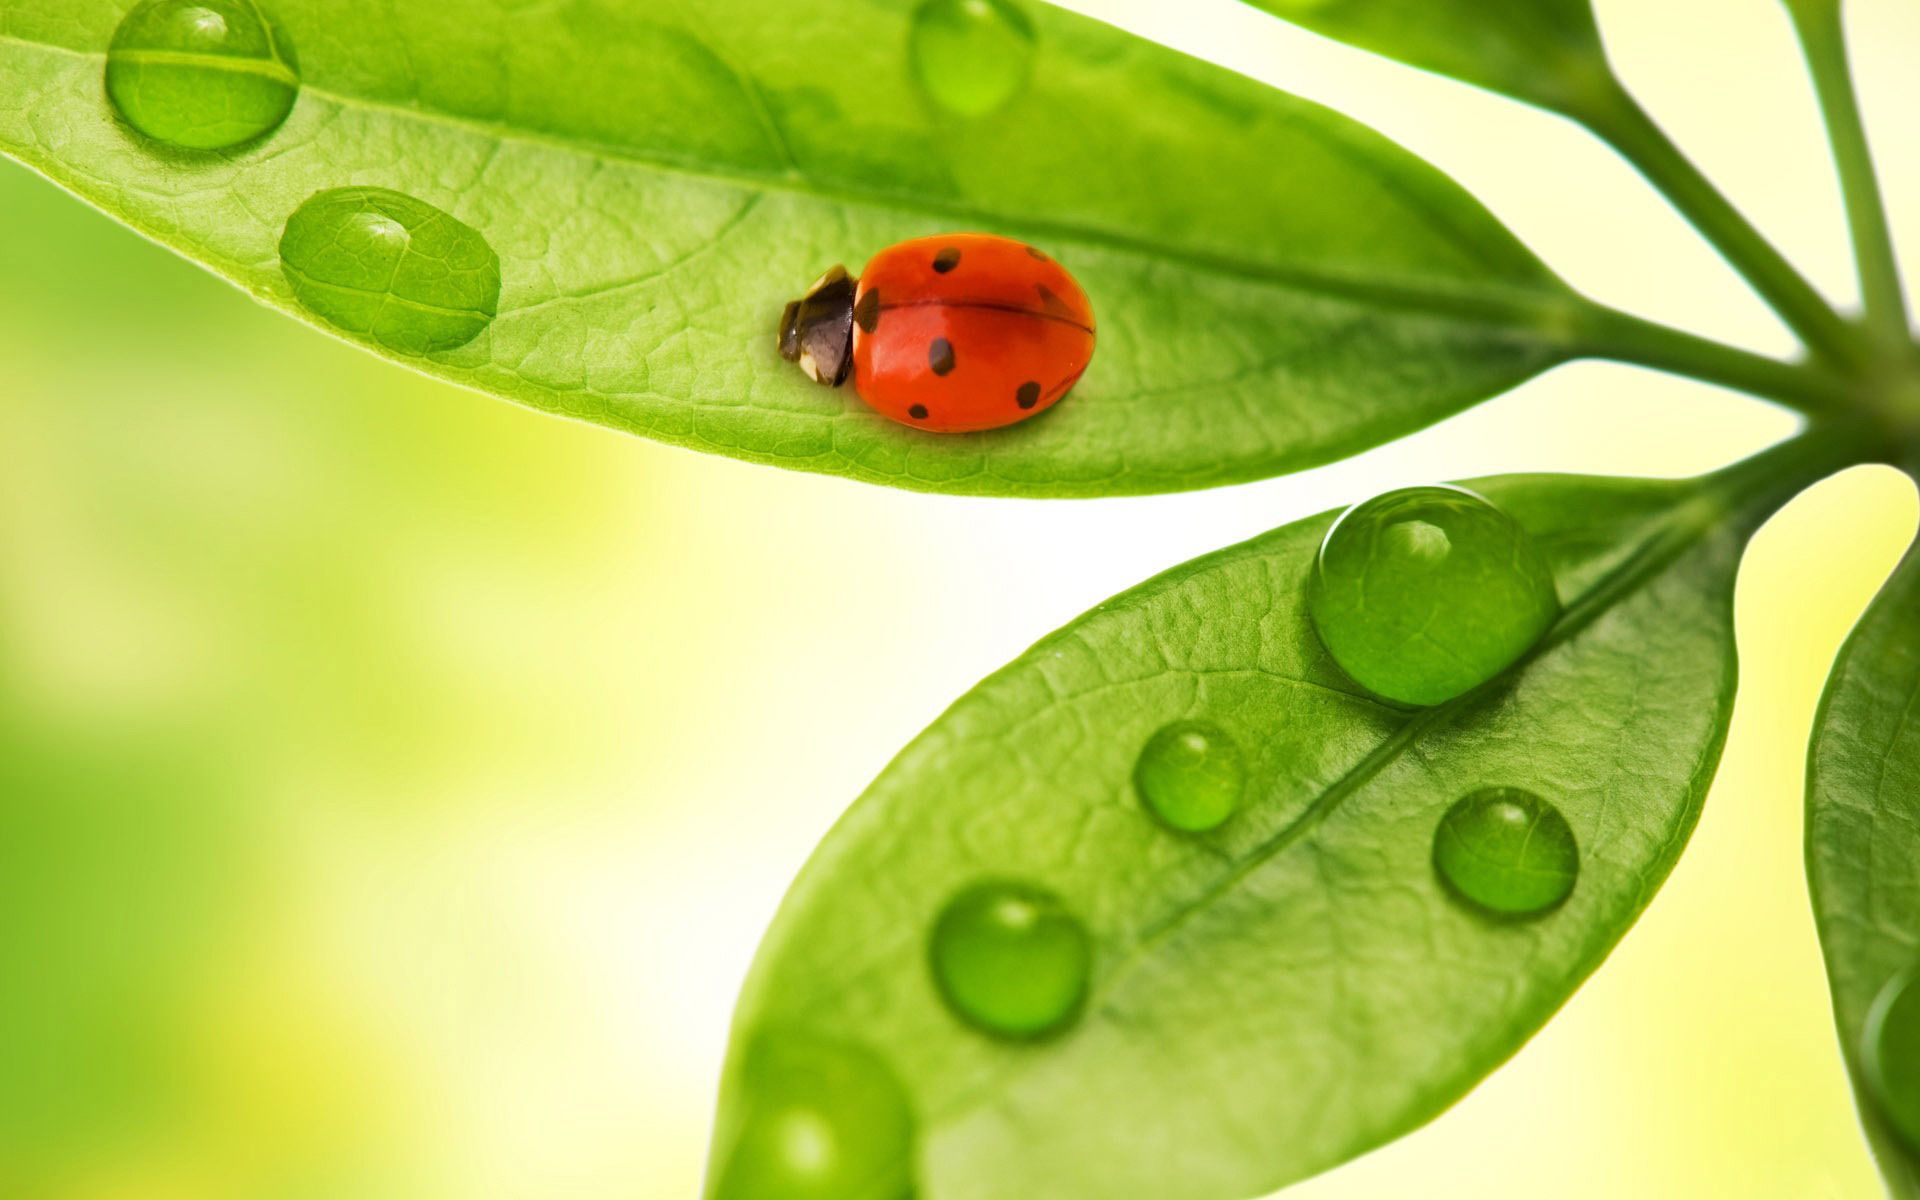 Ladybug on the leaf wallpaper - free wallpapers, download ...